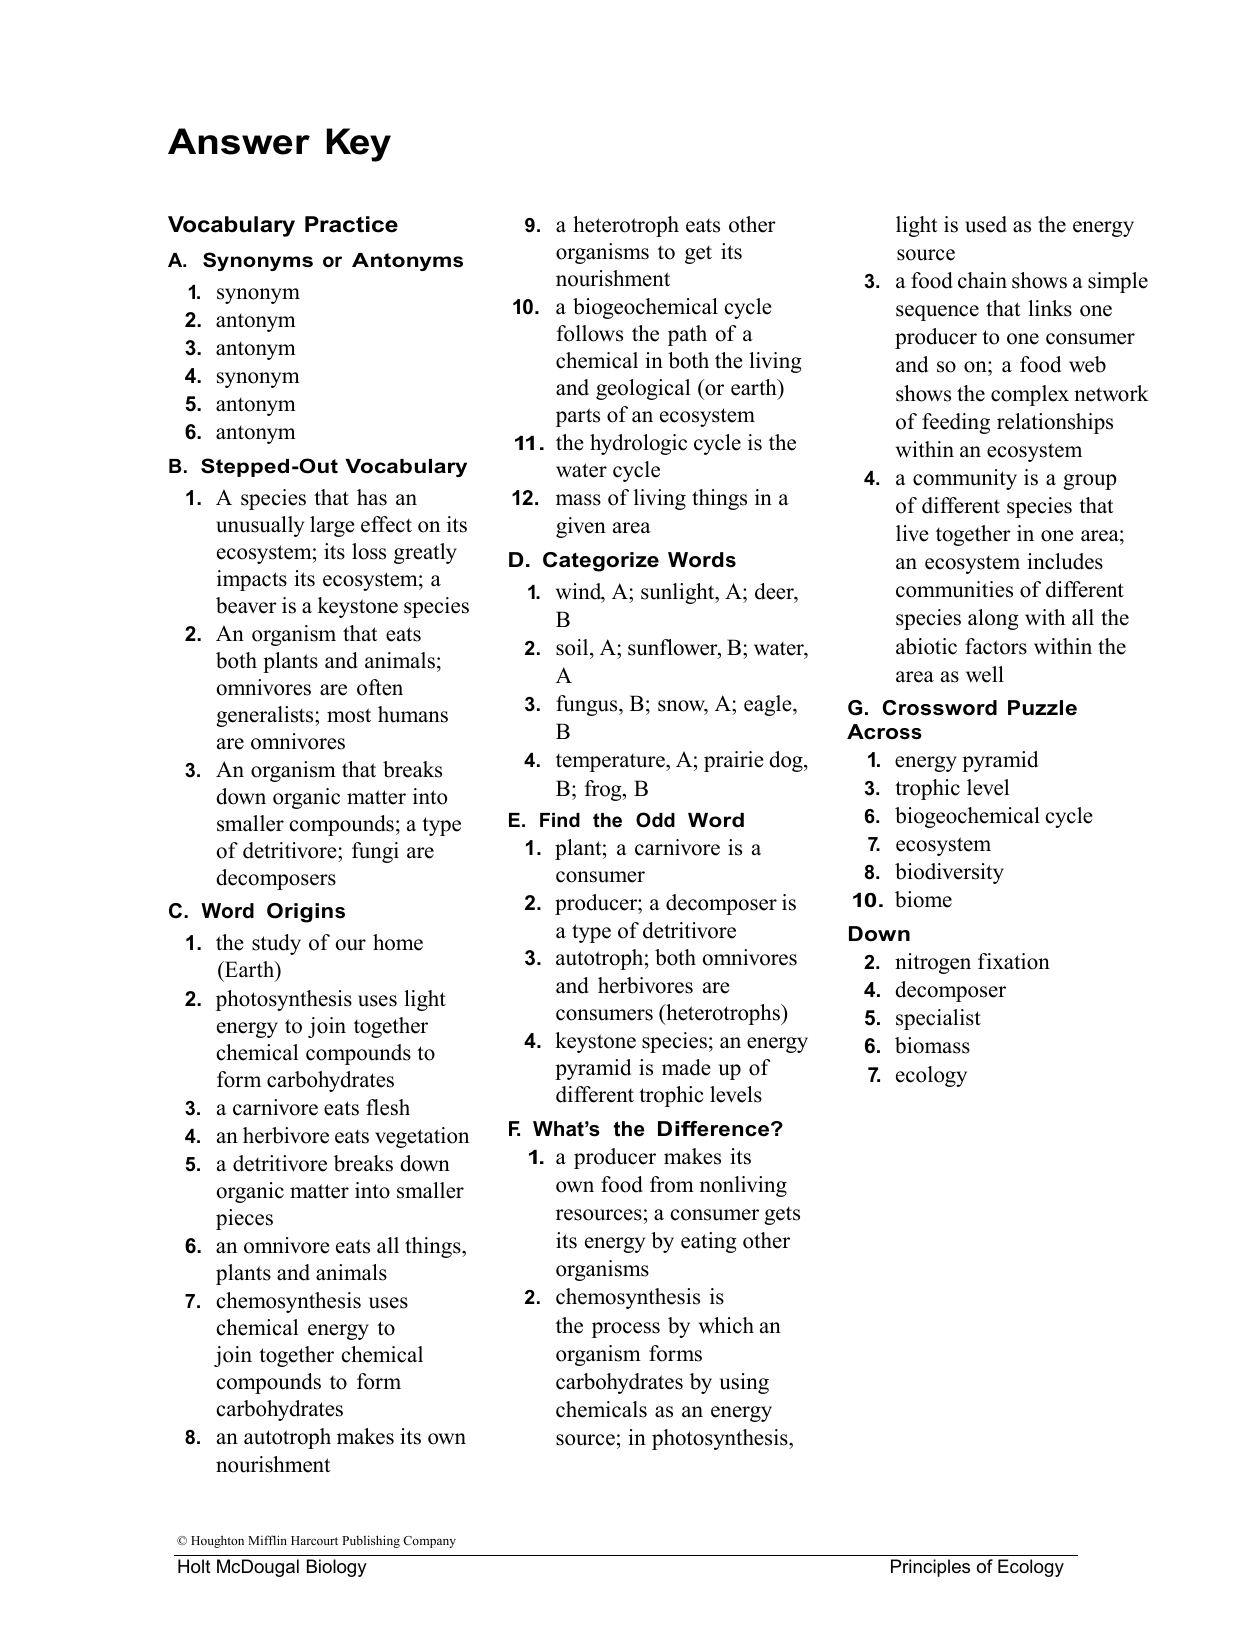 Answer Key Intended For Principles Of Ecology Worksheet Answers